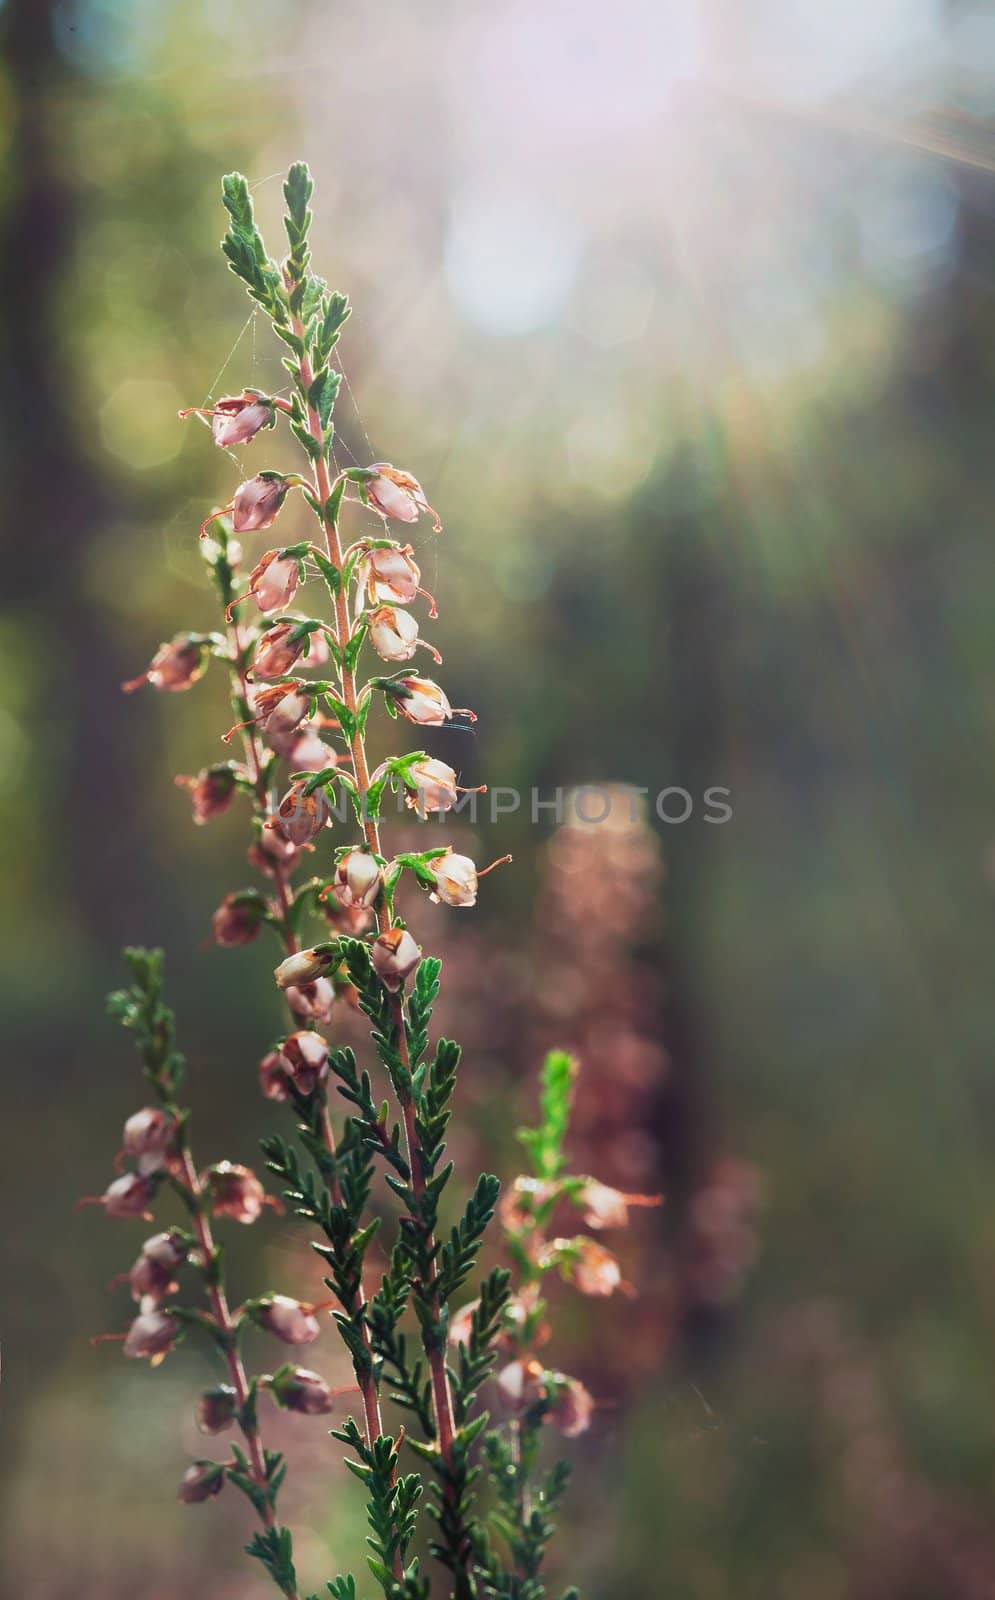 Calluna vulgaris (known as Common Heather, ling, or simply heather)